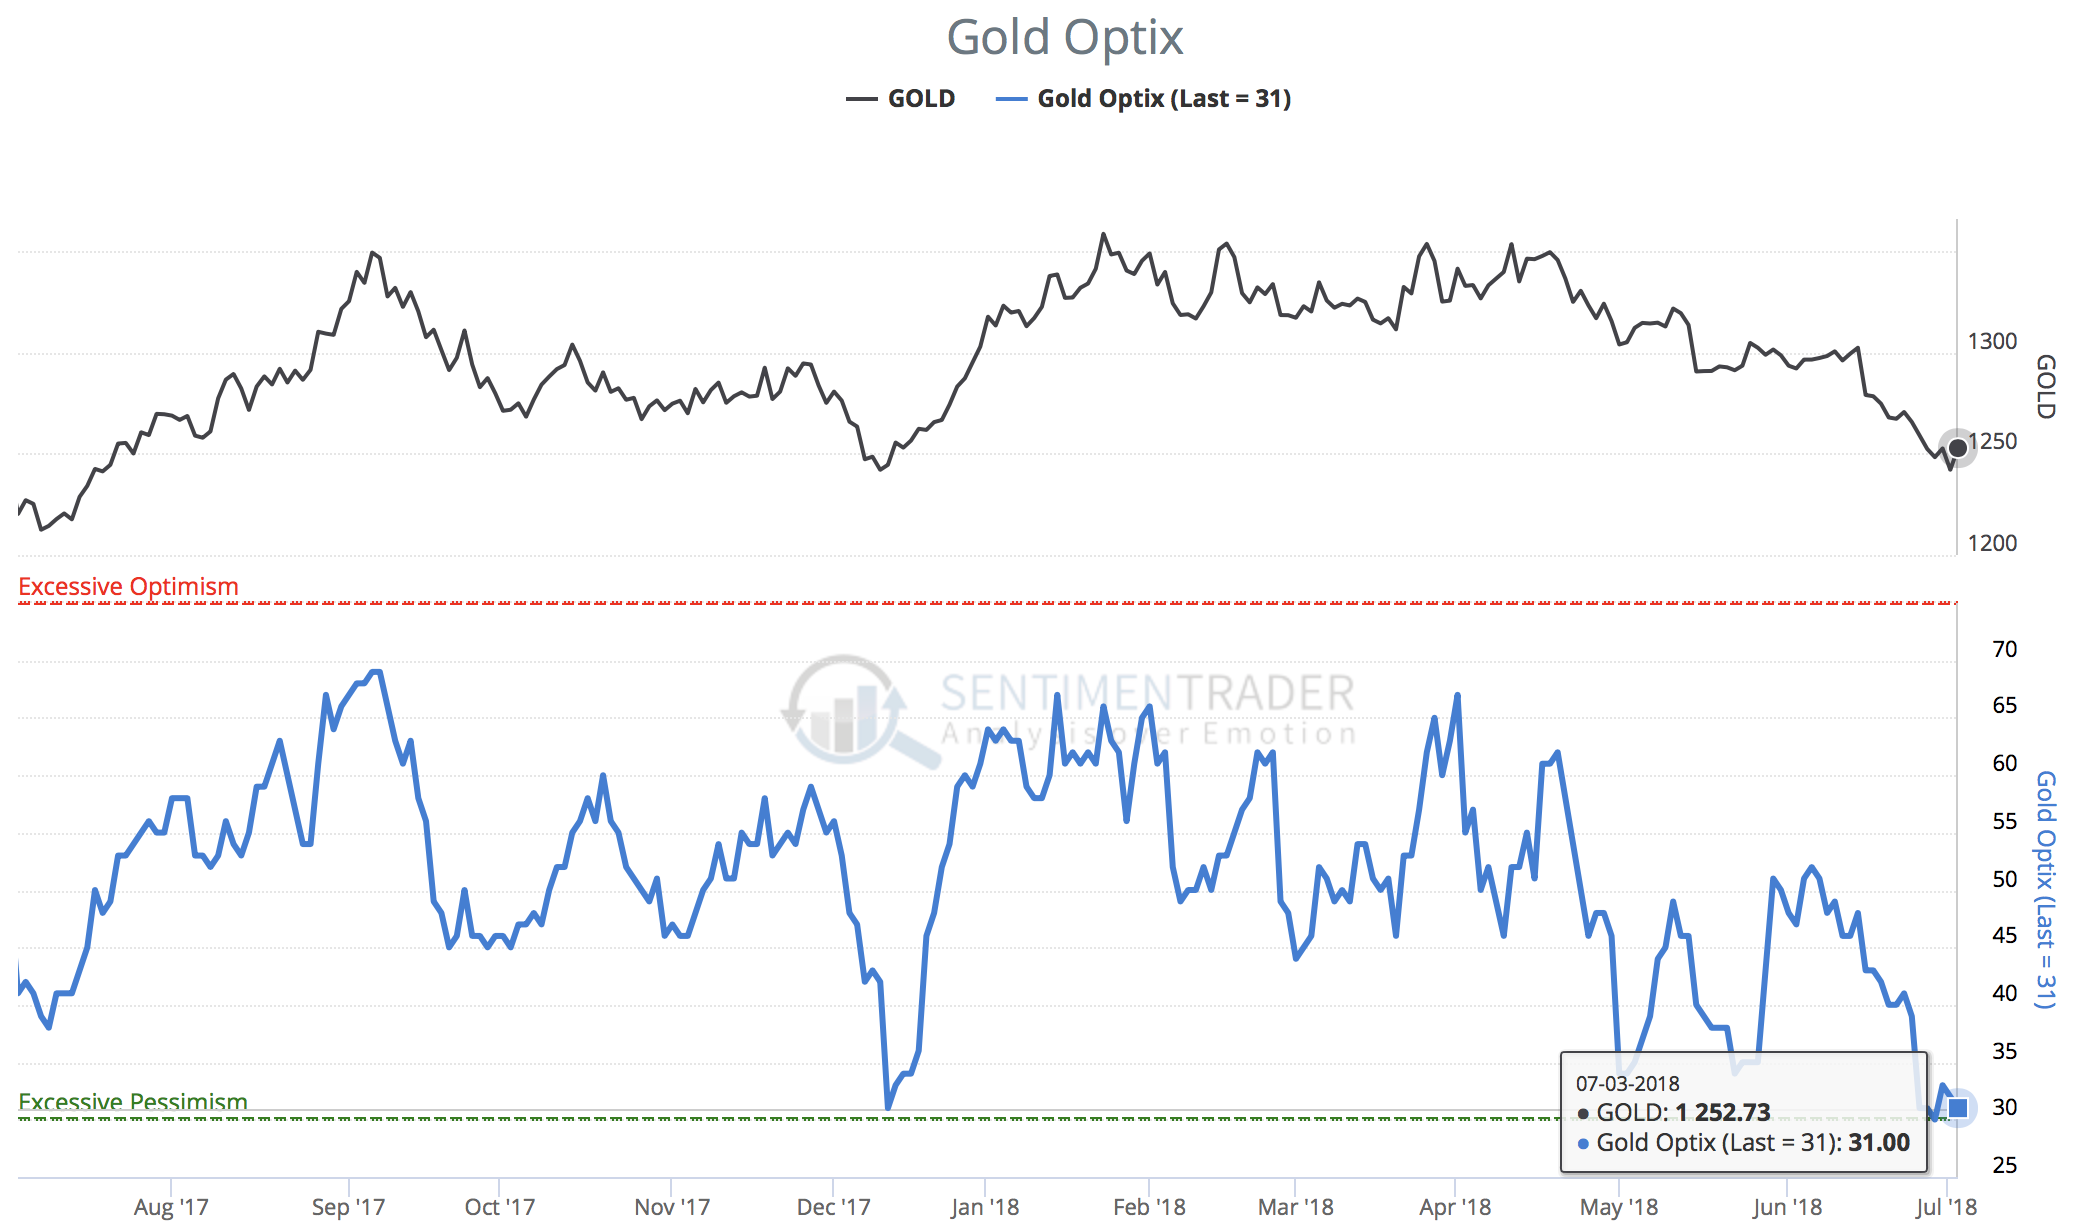 Gold Optimism Index as of July 3rd, 2018